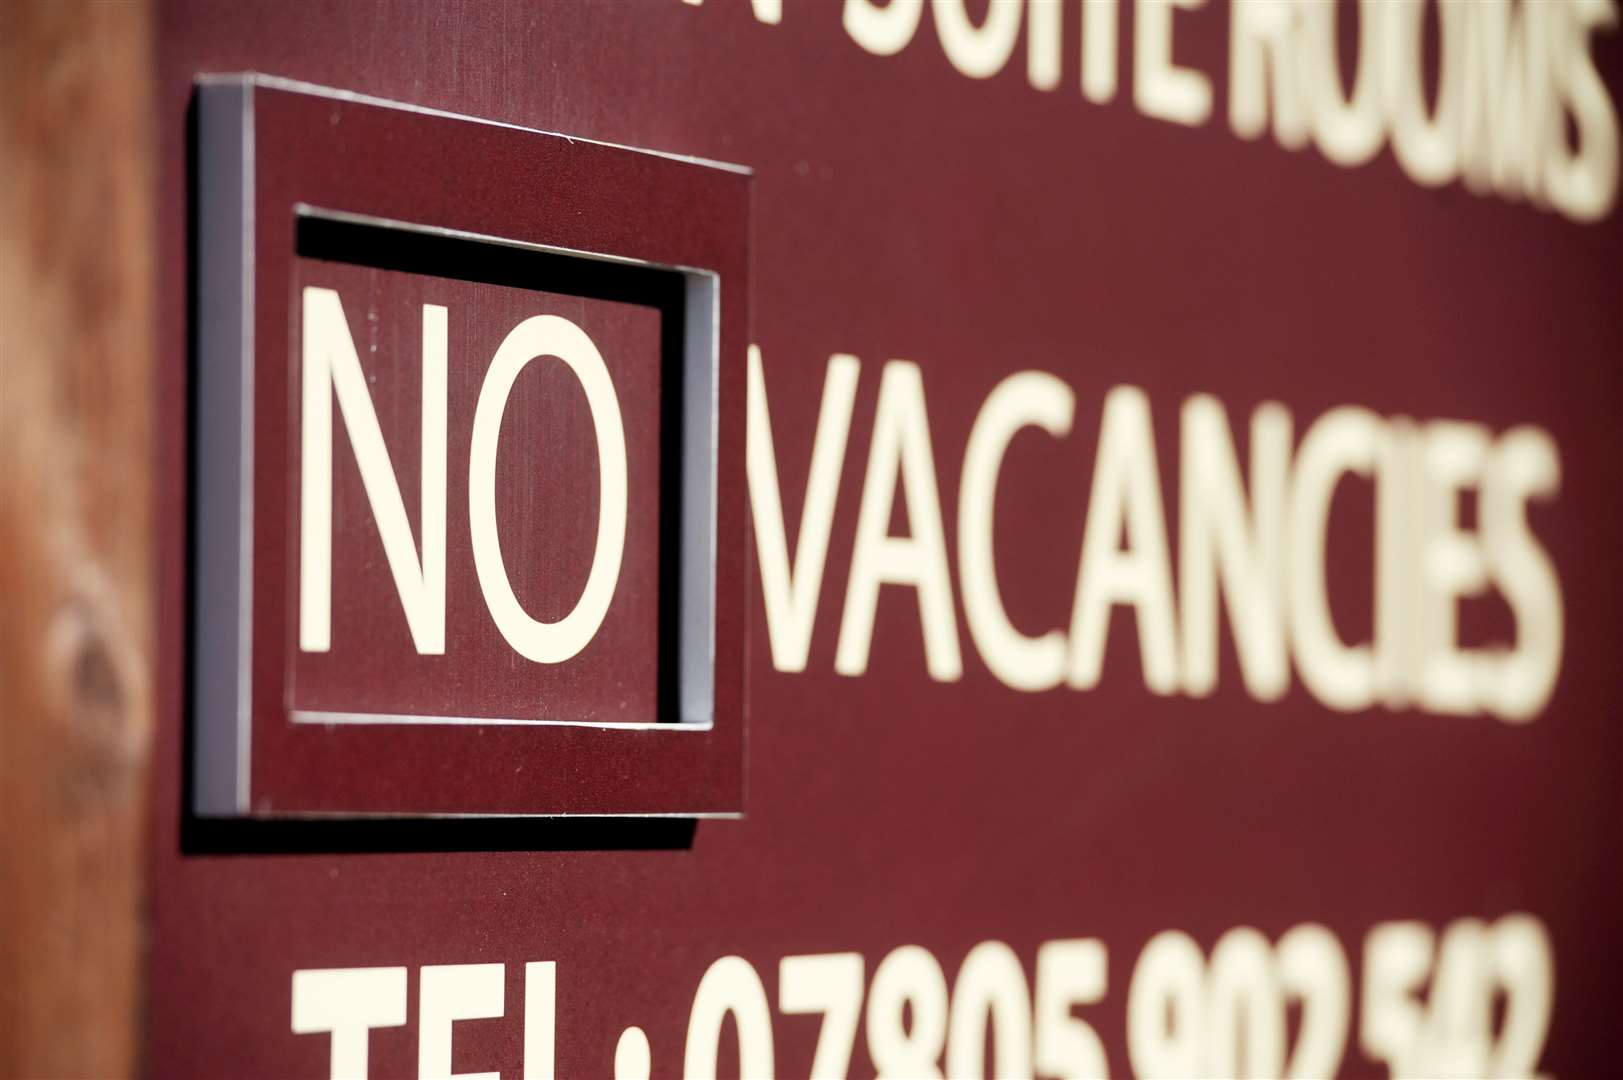 Seeing 'no vacancies' sigs will indicate the area's popularity.